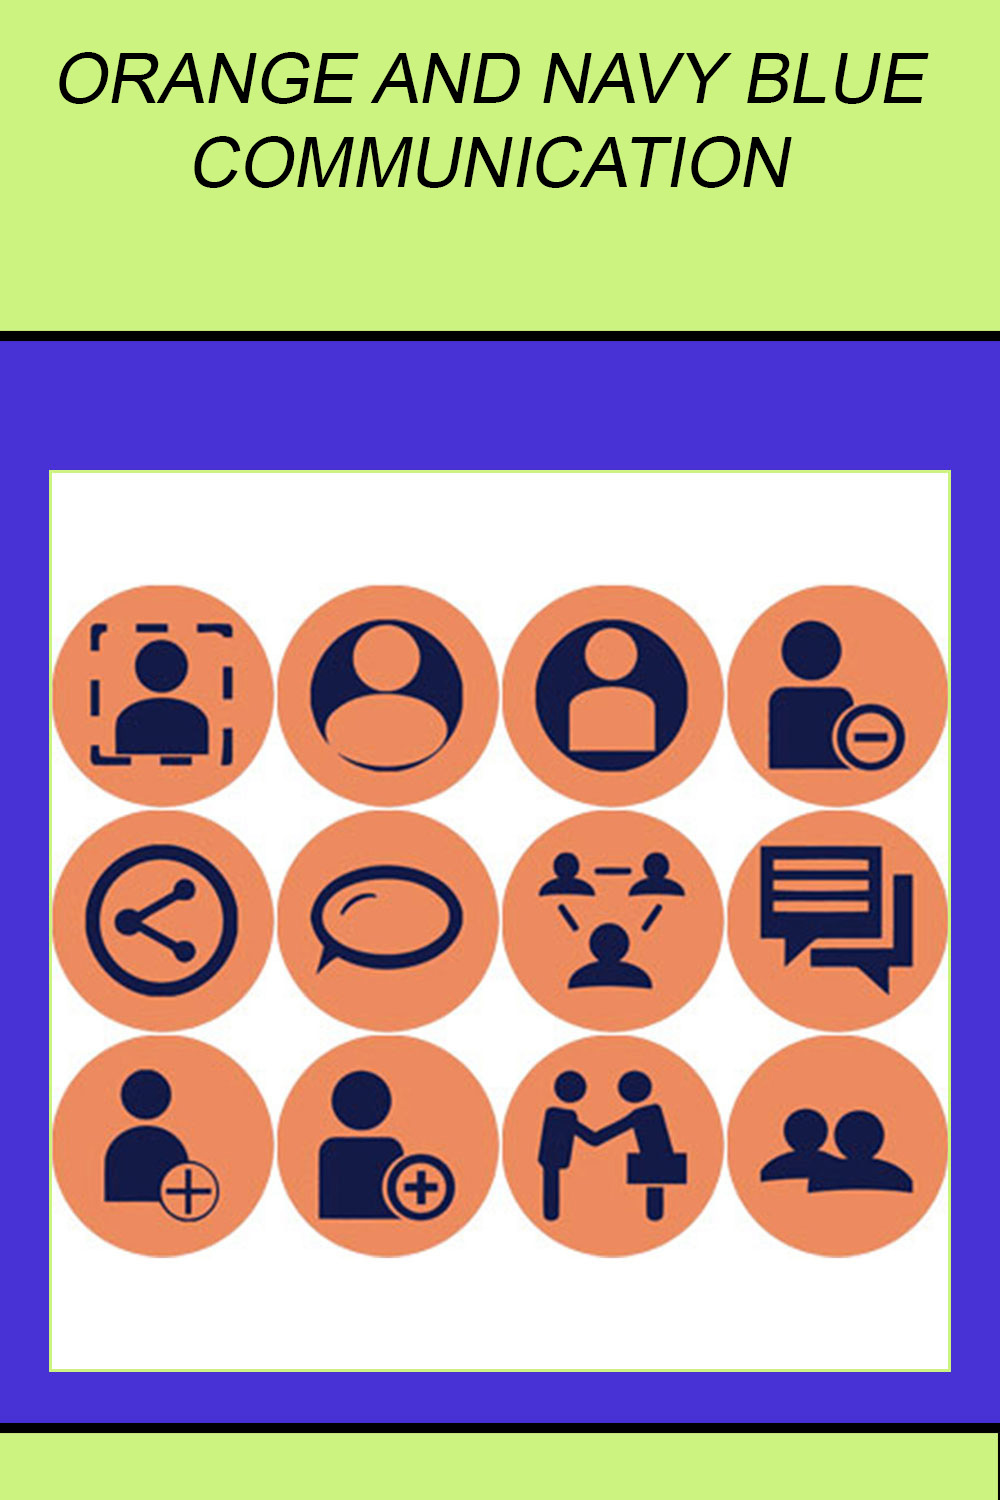 ORANGE AND NAVY BLUE COMMUNICATION ROUND ICONS pinterest preview image.